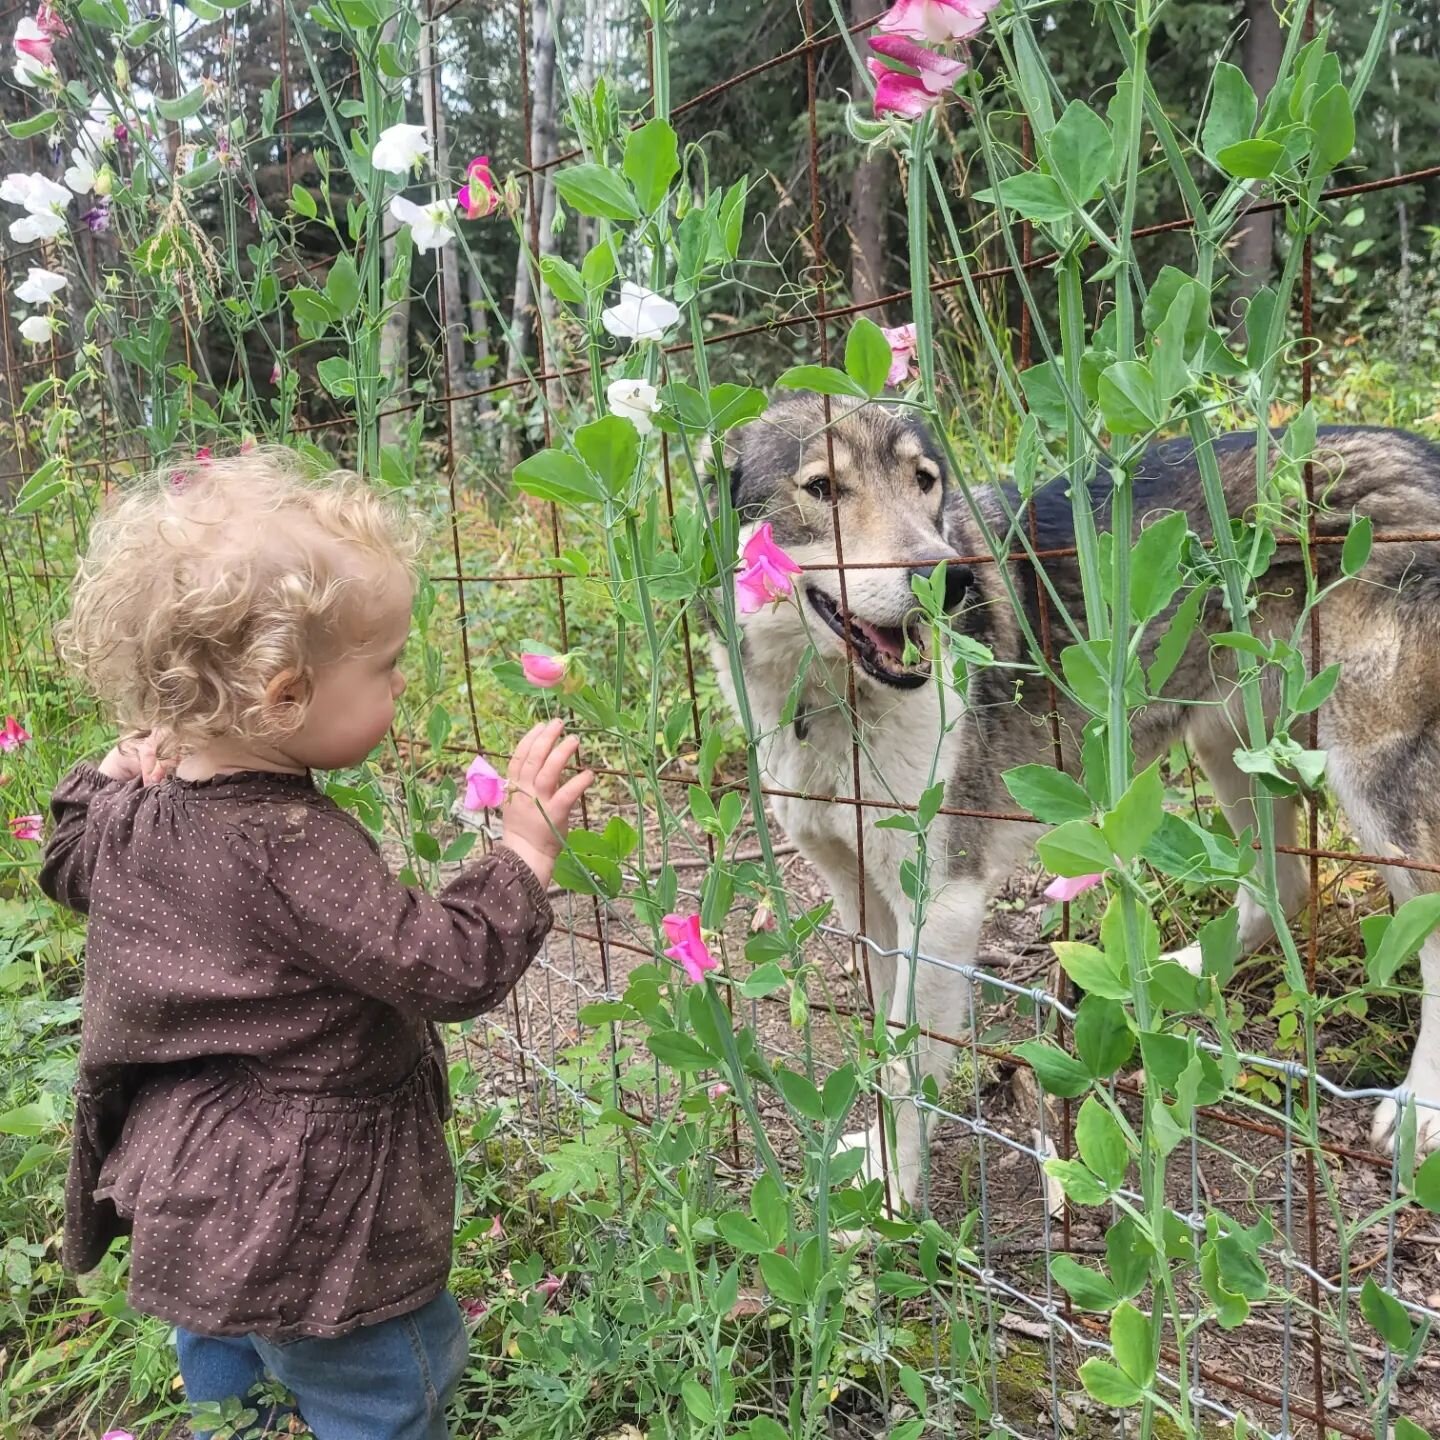 We built a fence to protect our garden from our main pest- the Alaskan Husky-but didn't anticipate that those pests would gain a toddler accomplice to feed them peas through the fence!

#alaskahomestead #garden #garden fence #sleddogs #alaskasummer #